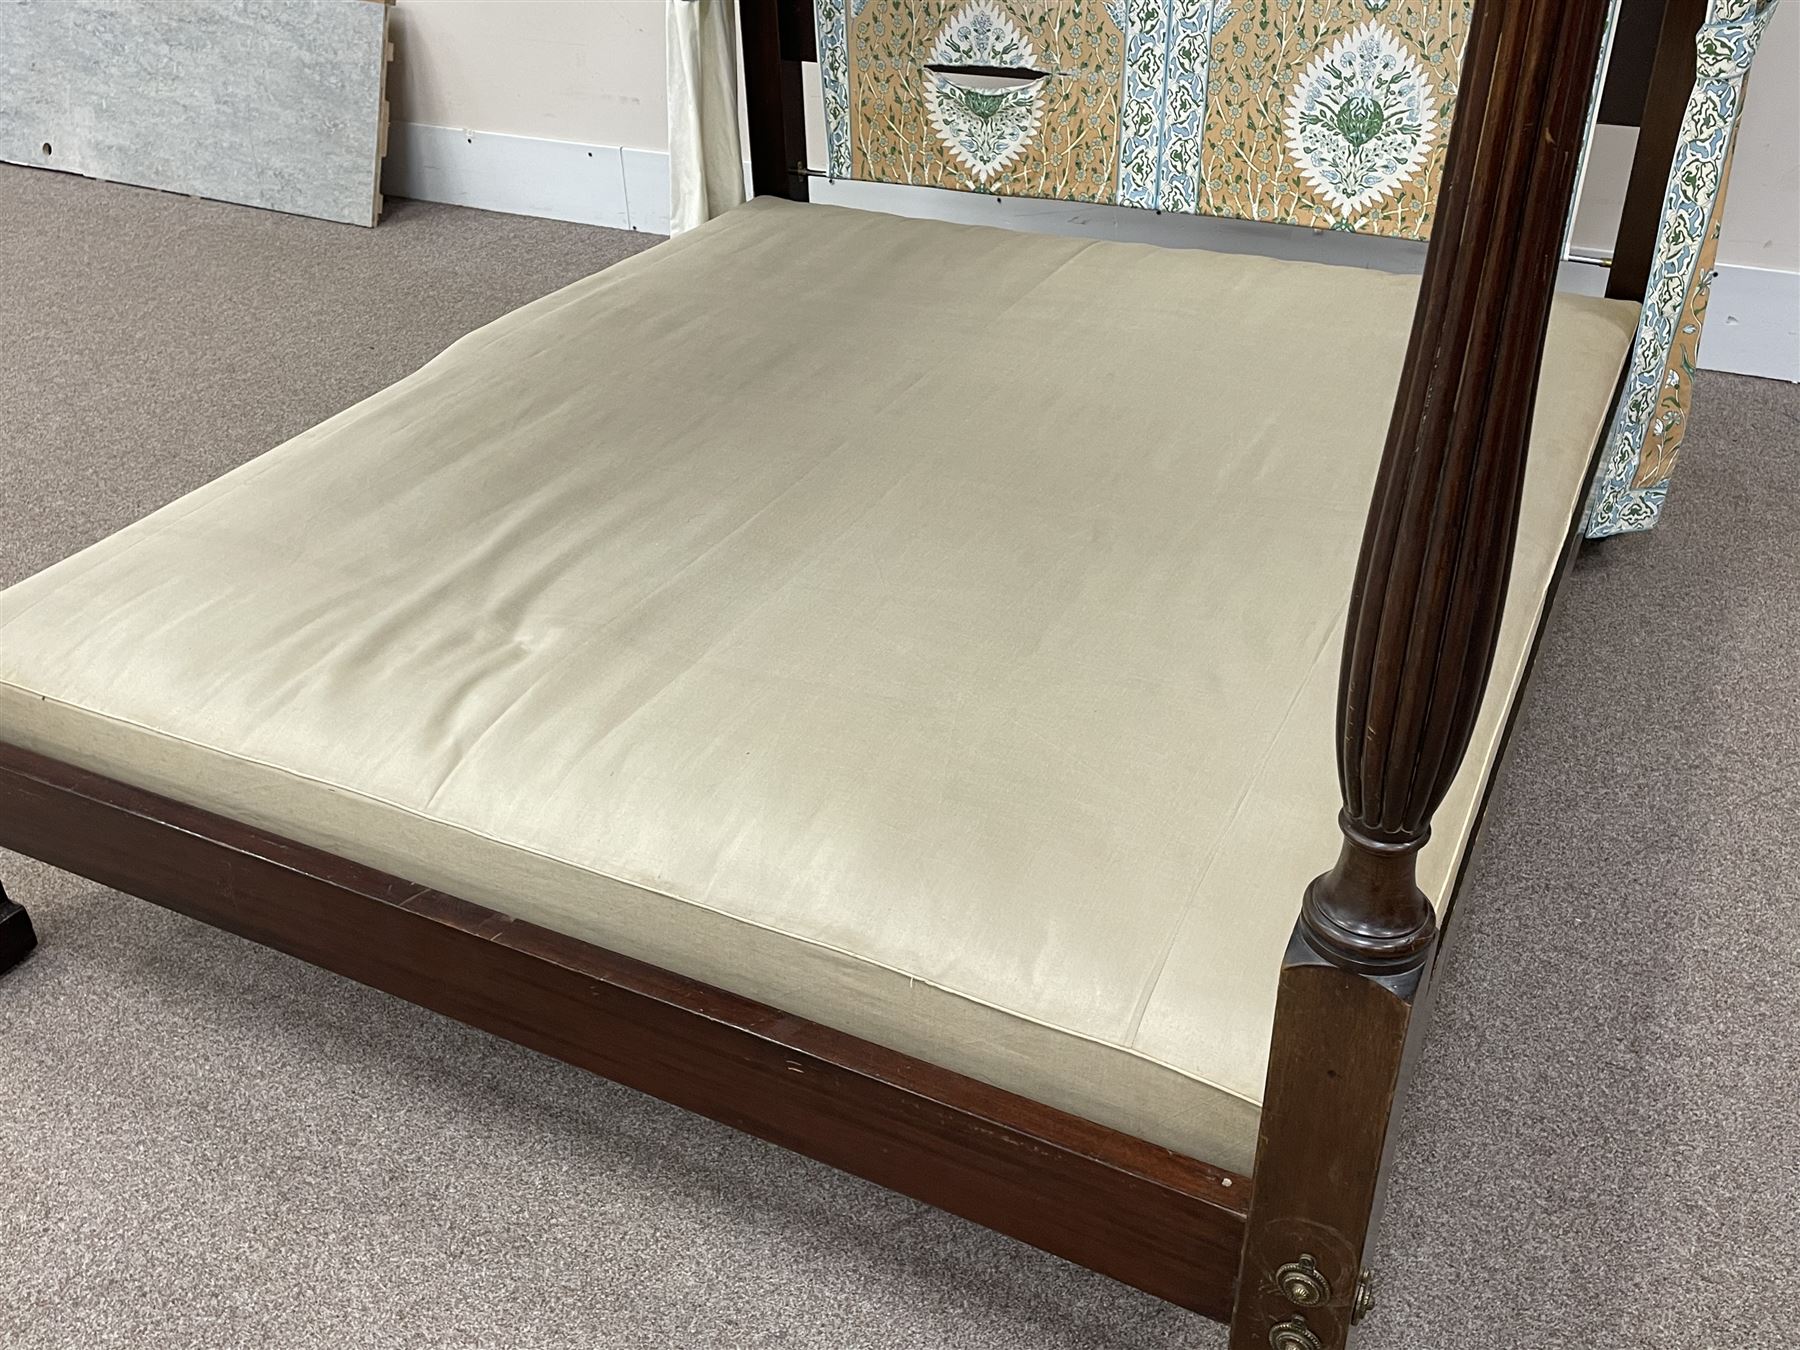 Early 20th century Chippendale style mahogany four poster bed - Image 11 of 14